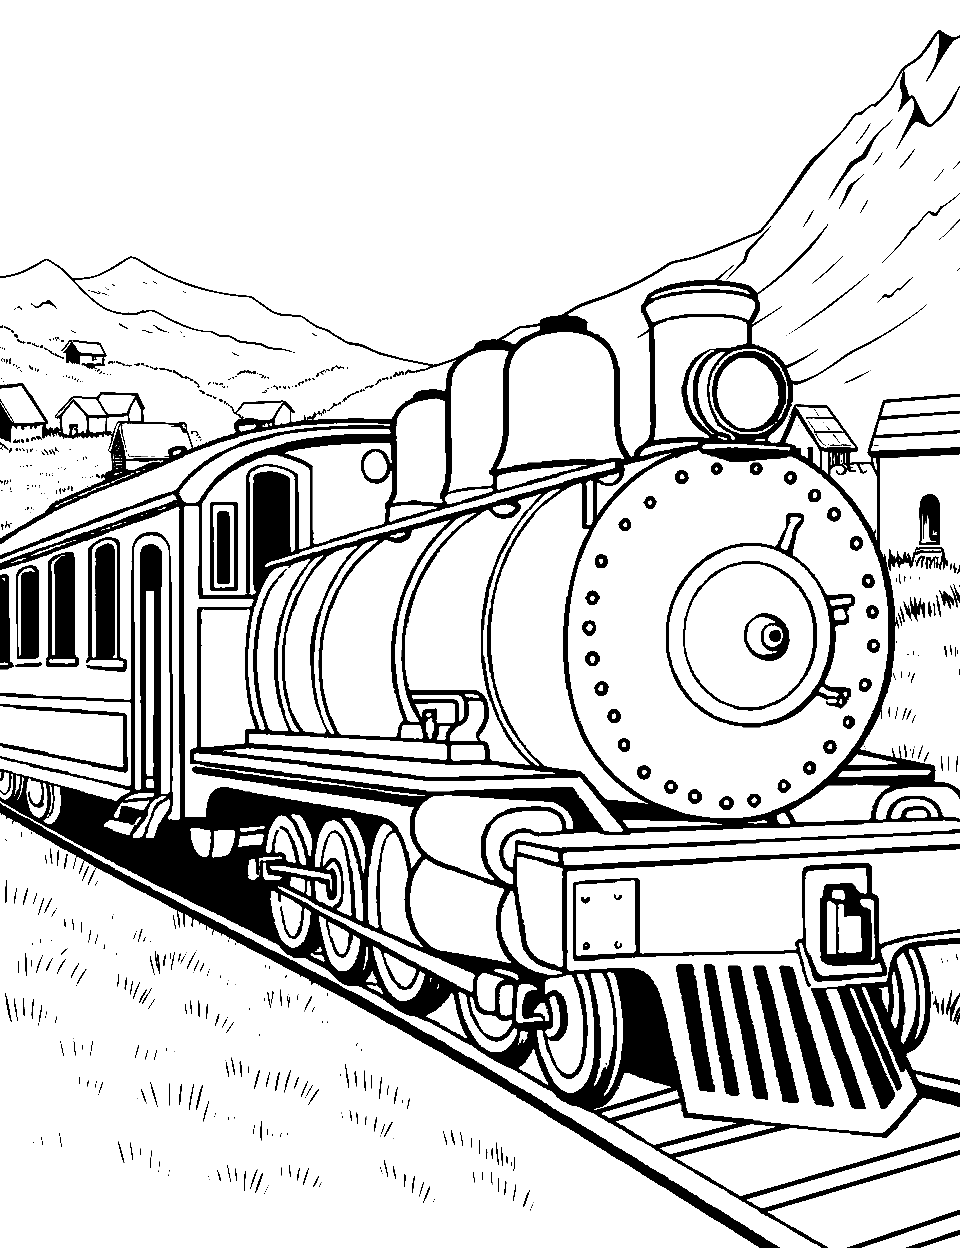 European Countryside Journey Train Coloring Page - An old-fashioned European train in a scenic countryside.